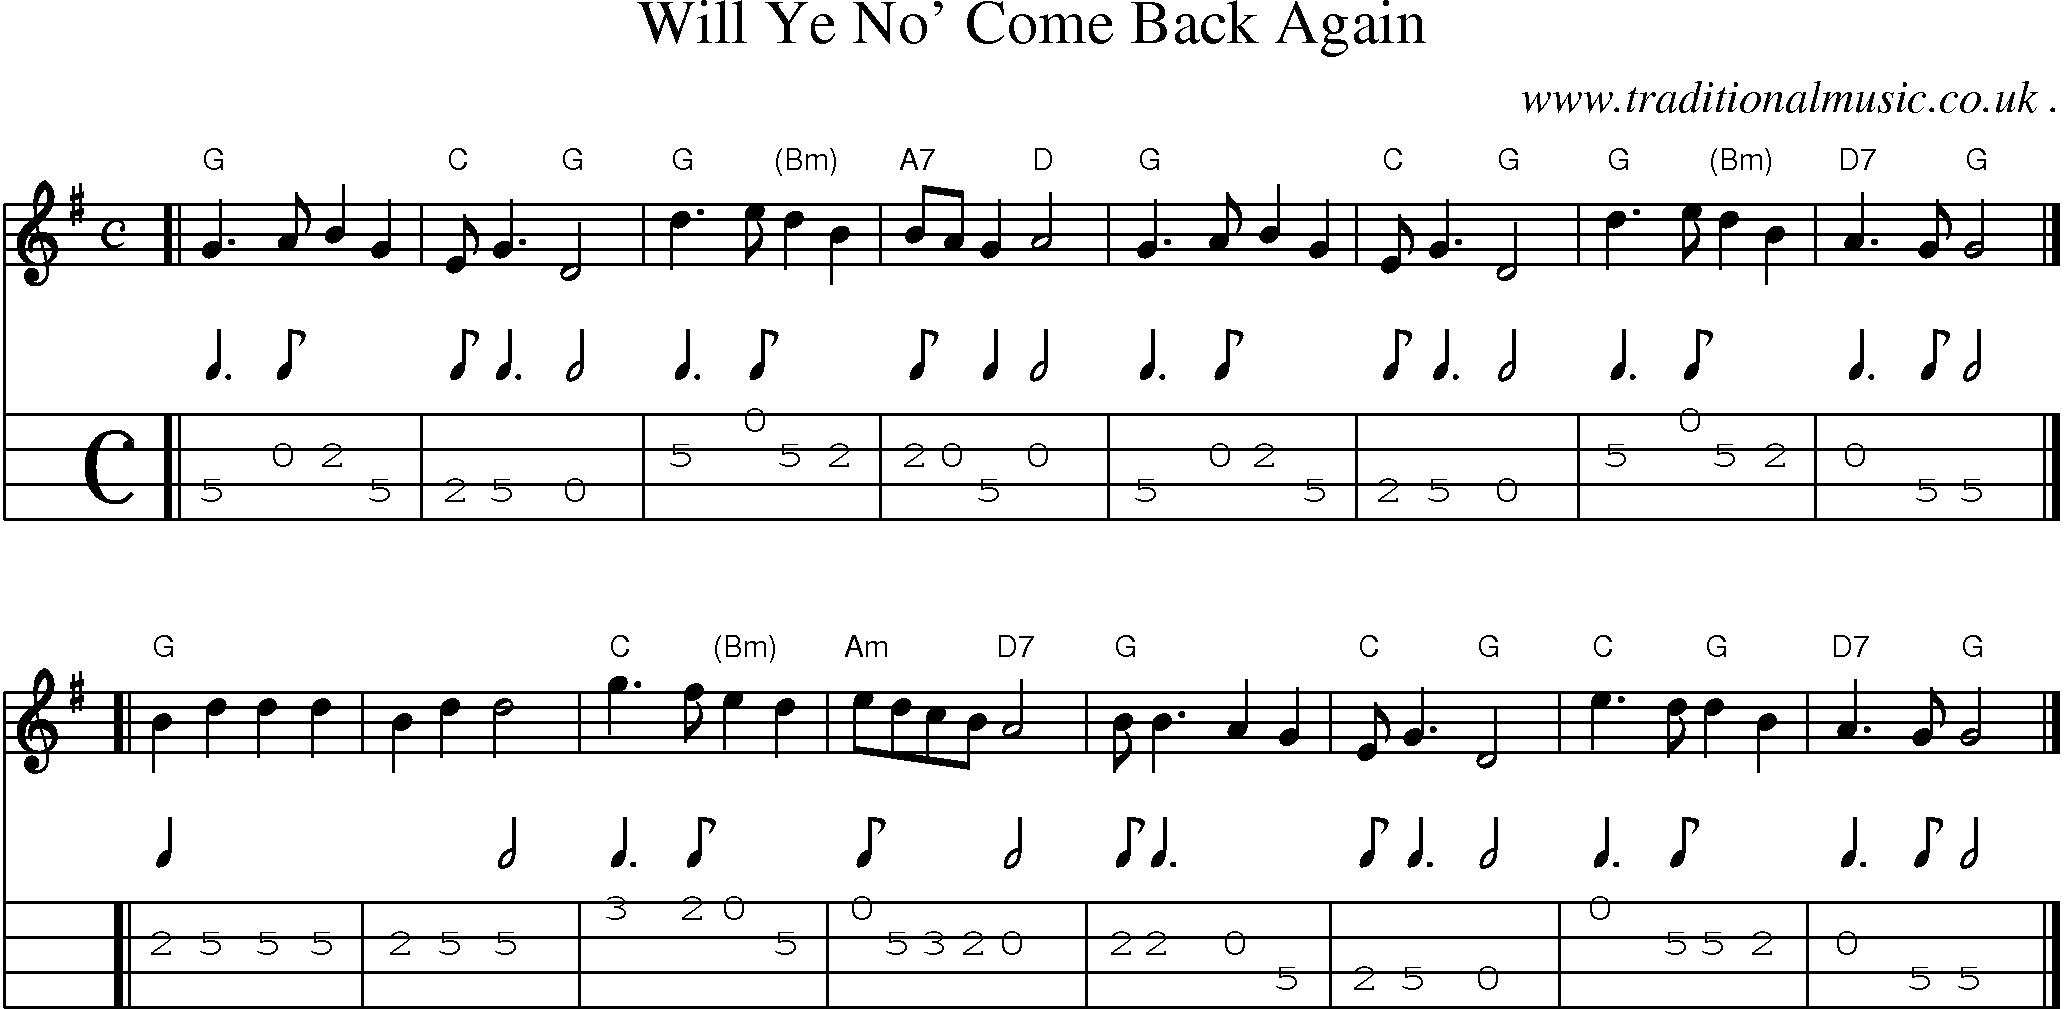 Sheet-music  score, Chords and Mandolin Tabs for Will Ye No Come Back Again